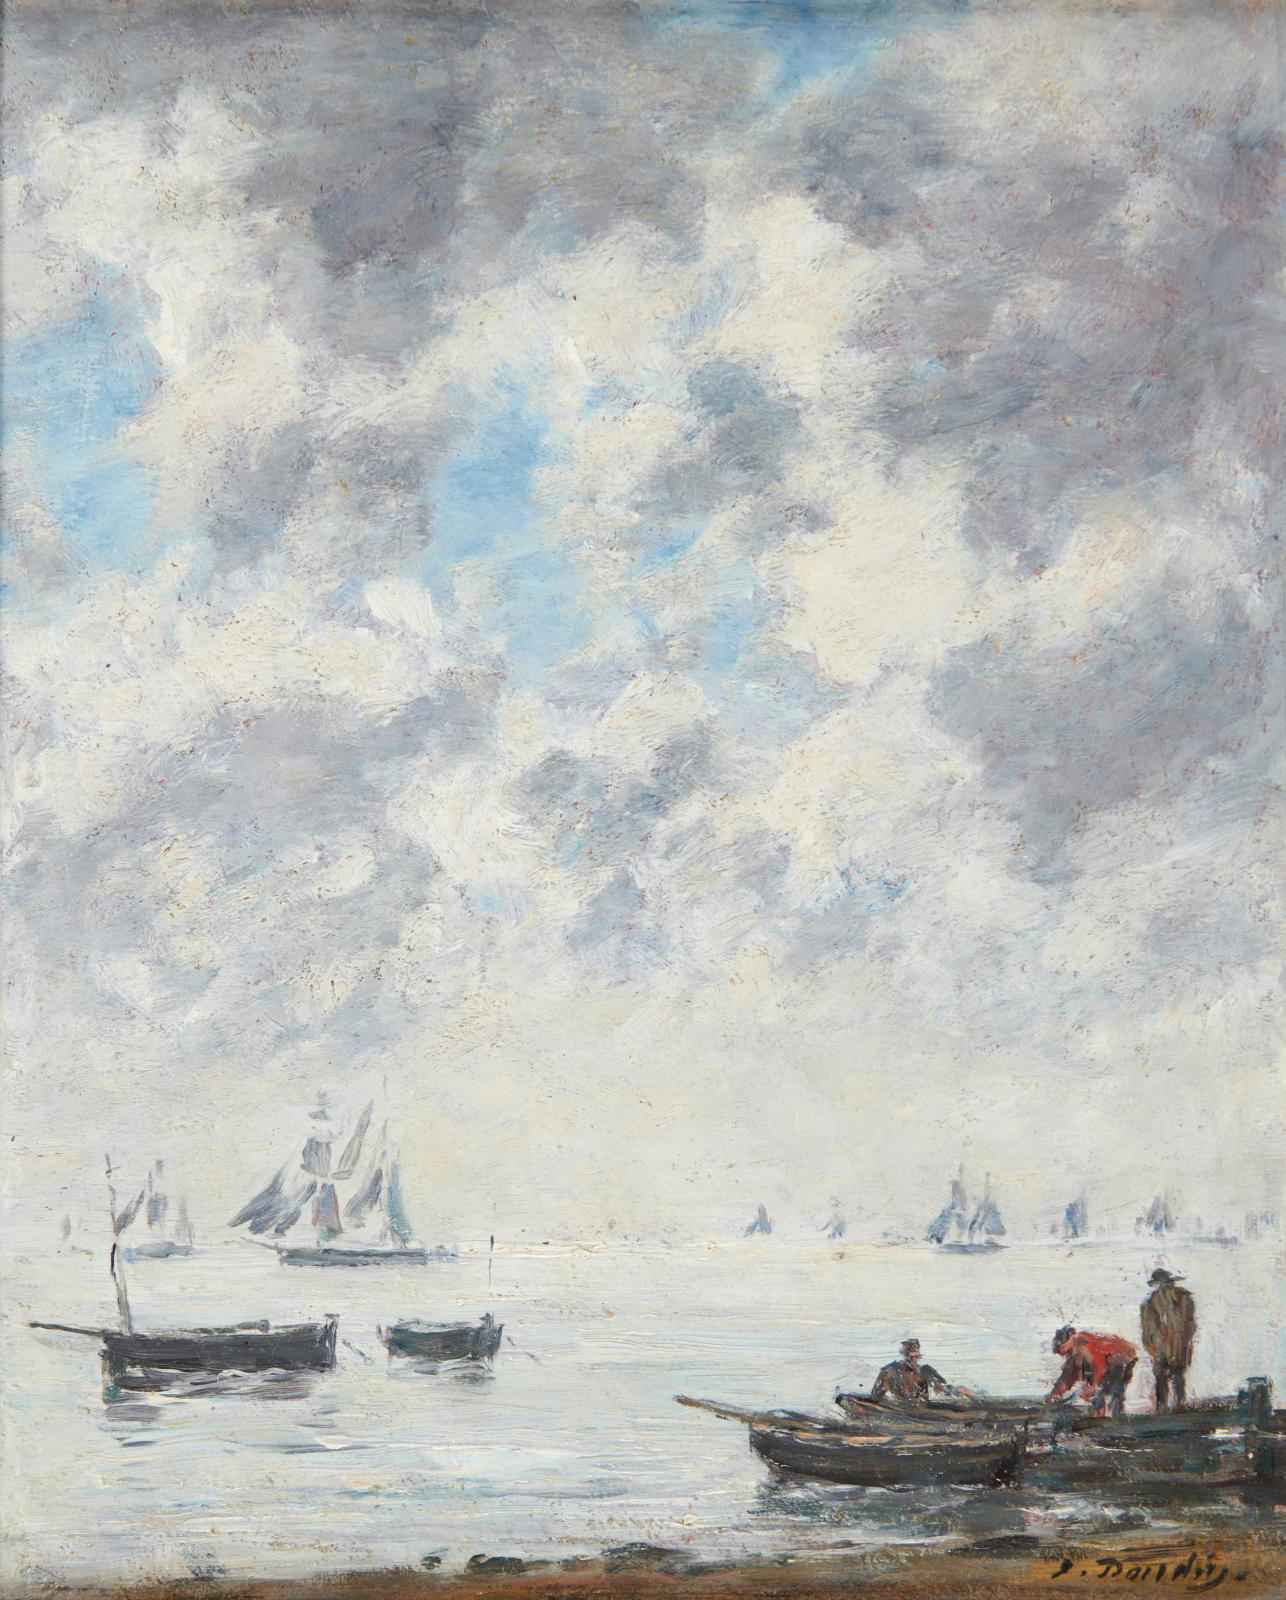 A painting by the great Eugène Boudin (1824–1898), Marine, soleil couchant (Seascape, Sunset), a c. 1885–1890 oil on panel (27 x 22 cm/10.